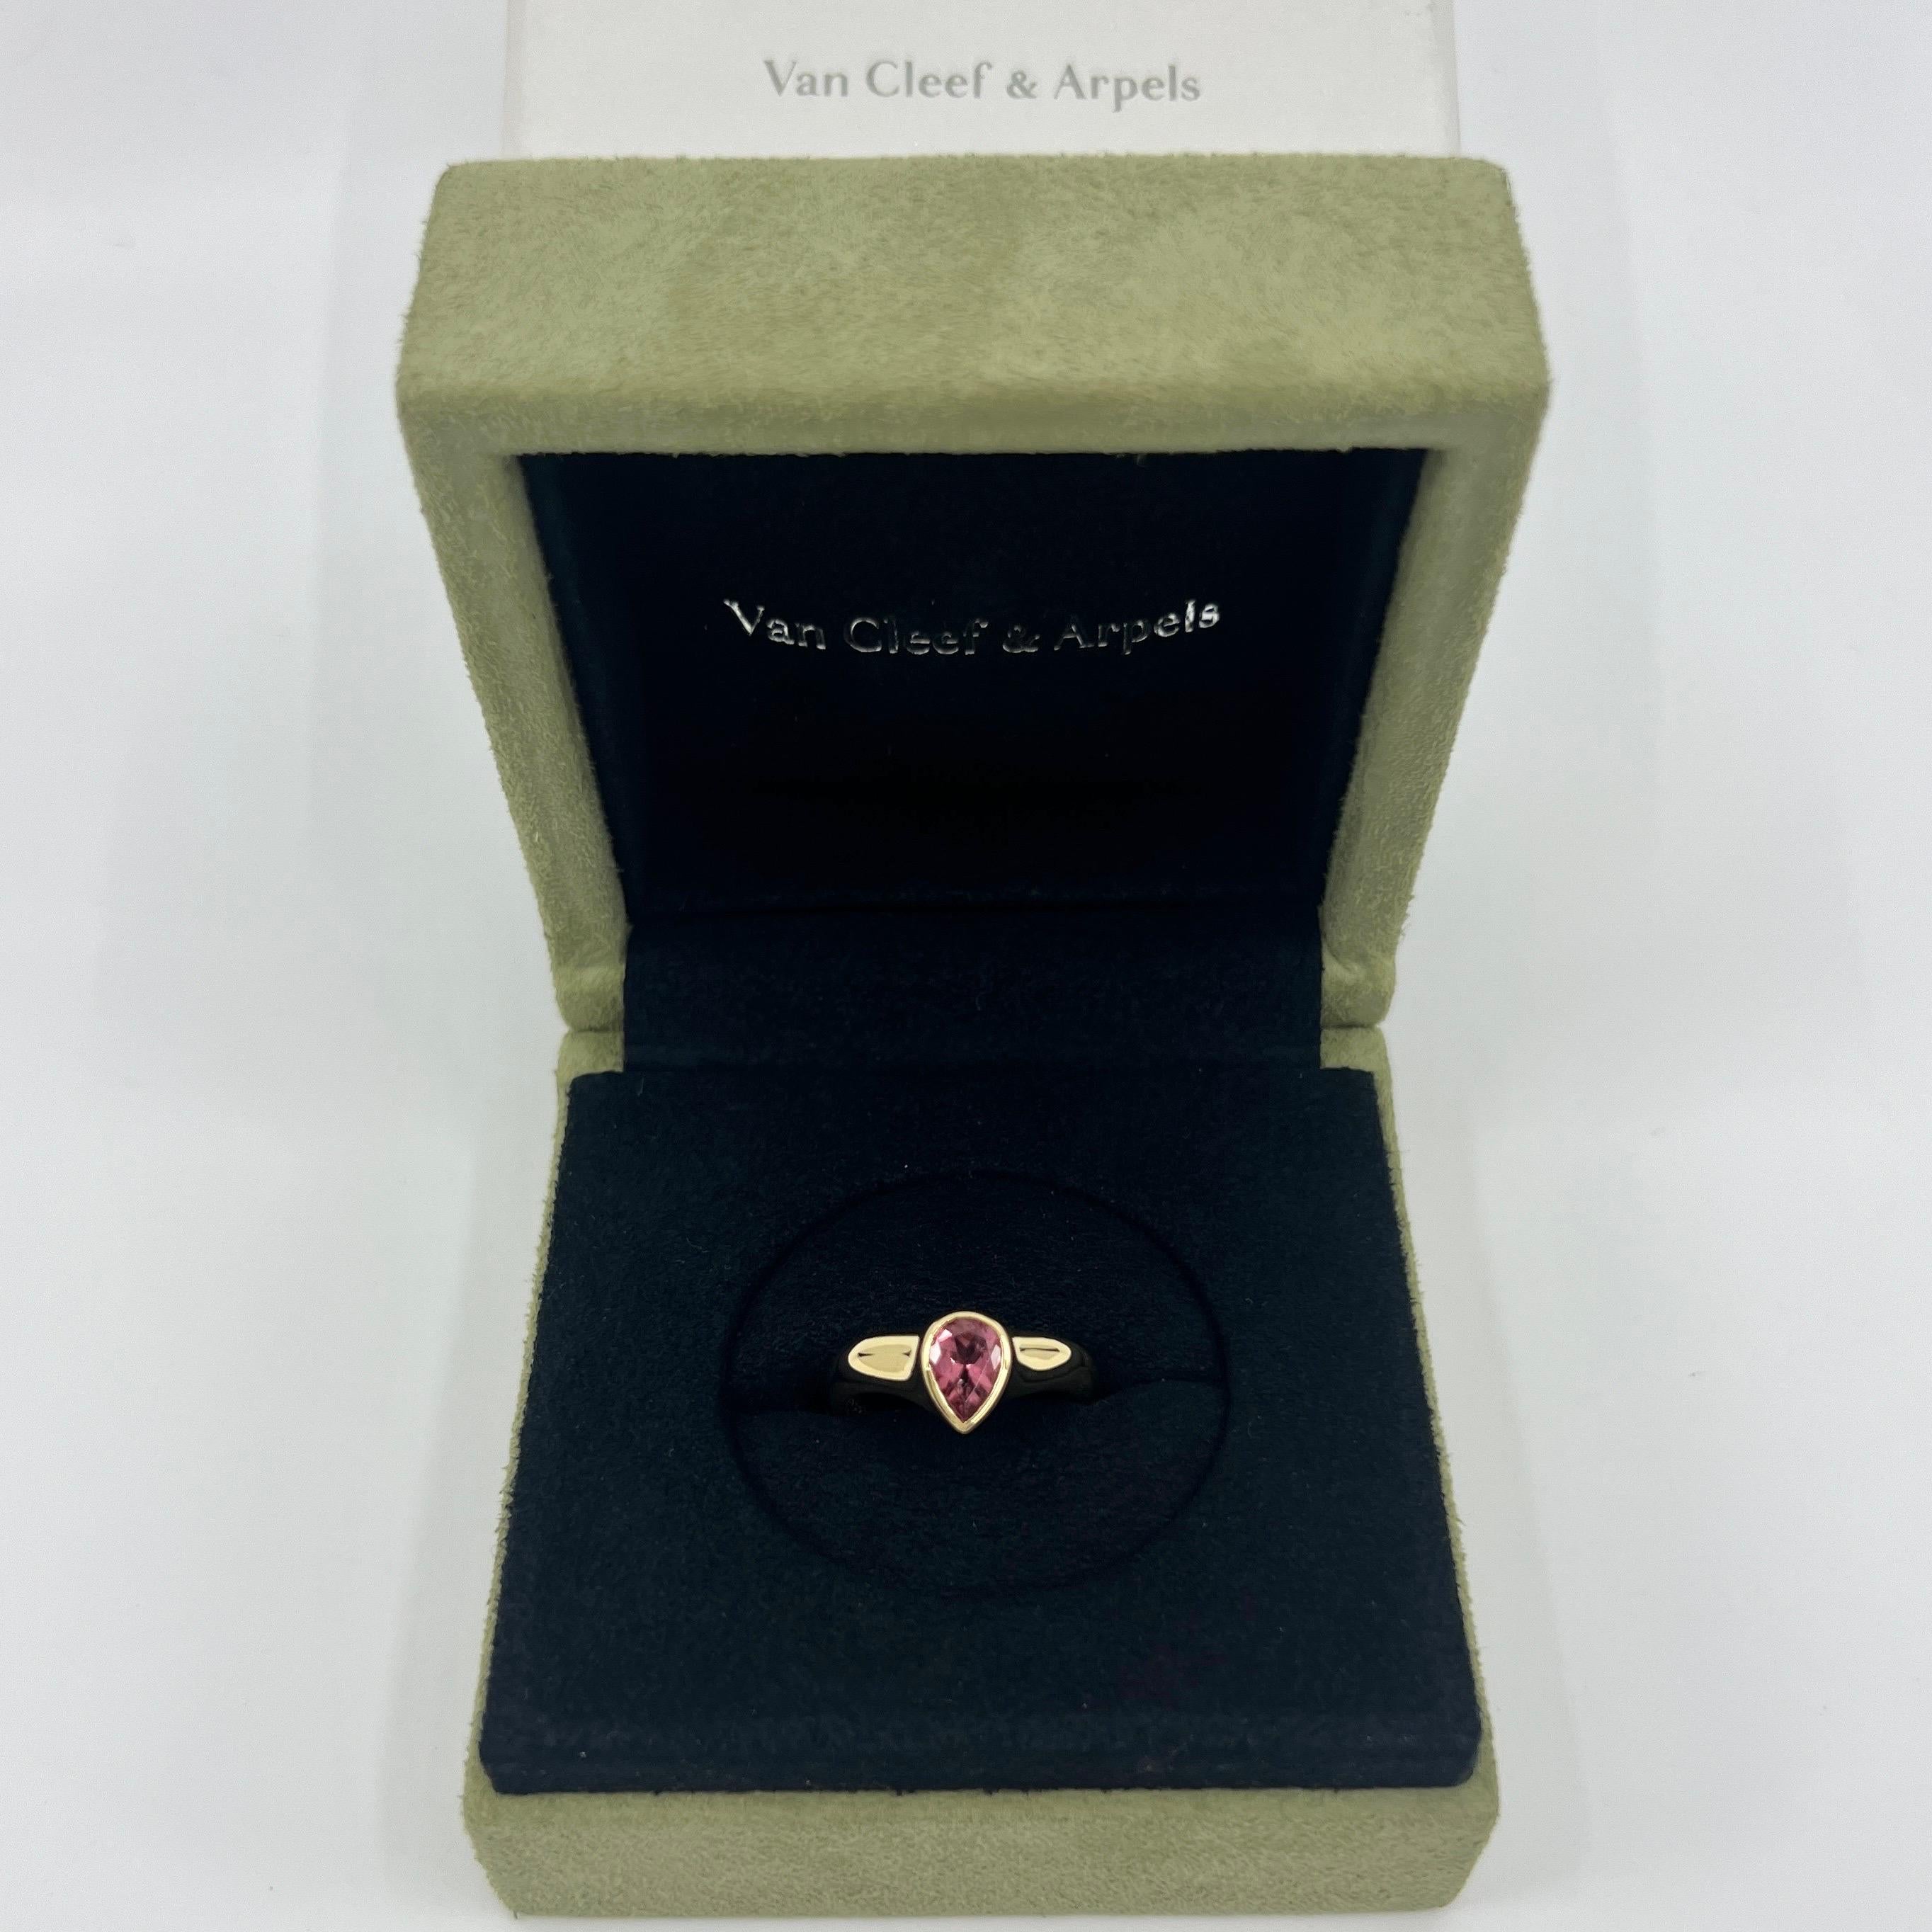 Rare Vintage Van Cleef & Arpels Pink Tourmaline Pear Cut 18k Yellow Gold Ring For Sale 8